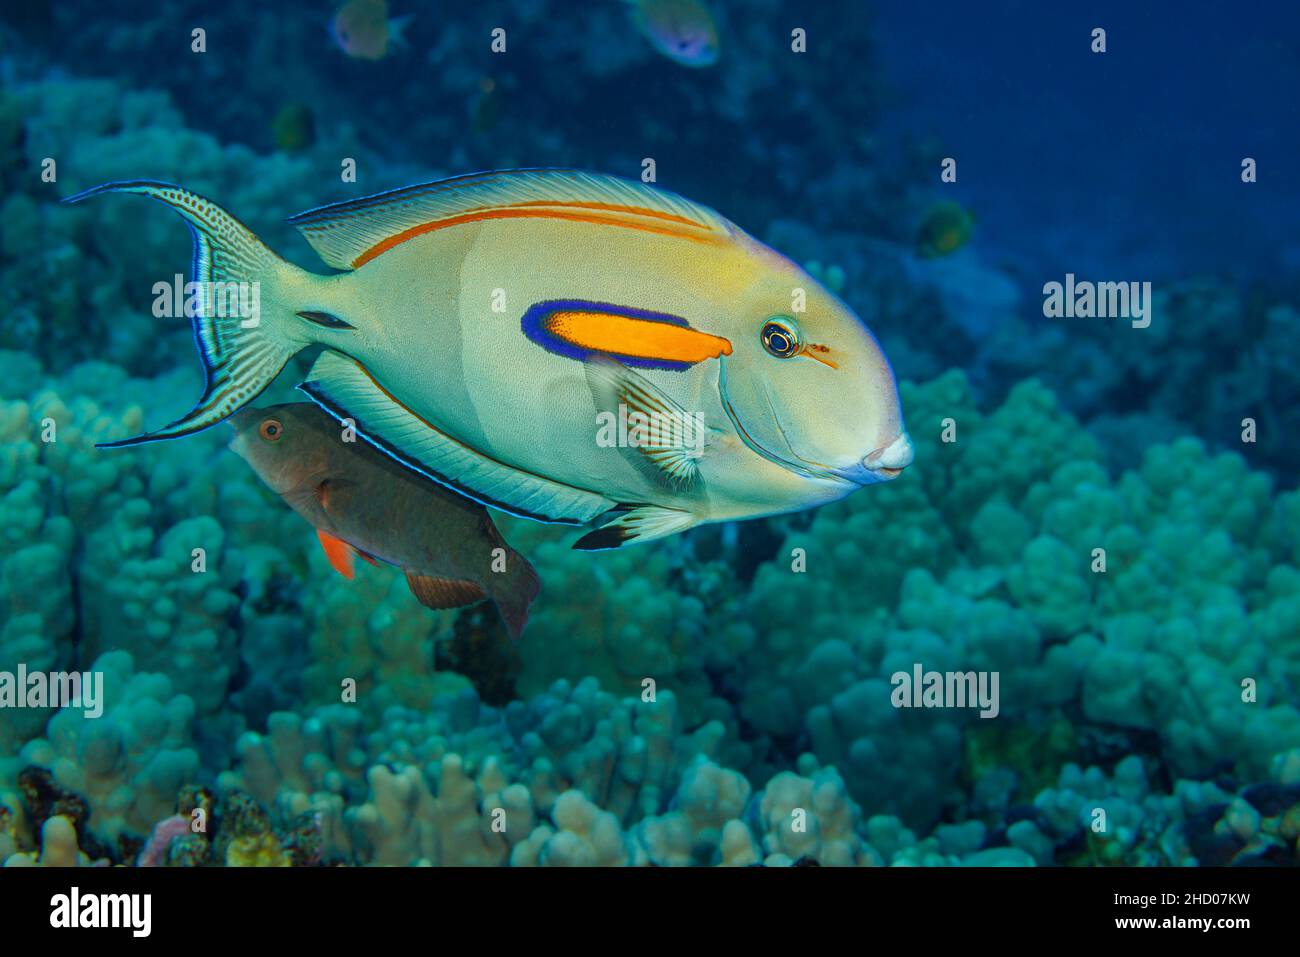 This orangeband surgeonfish, Acanthurus olivaceus, has brightened its color to expose any parasites to a nearby cleaner wrasse in hopes of attracting Stock Photo